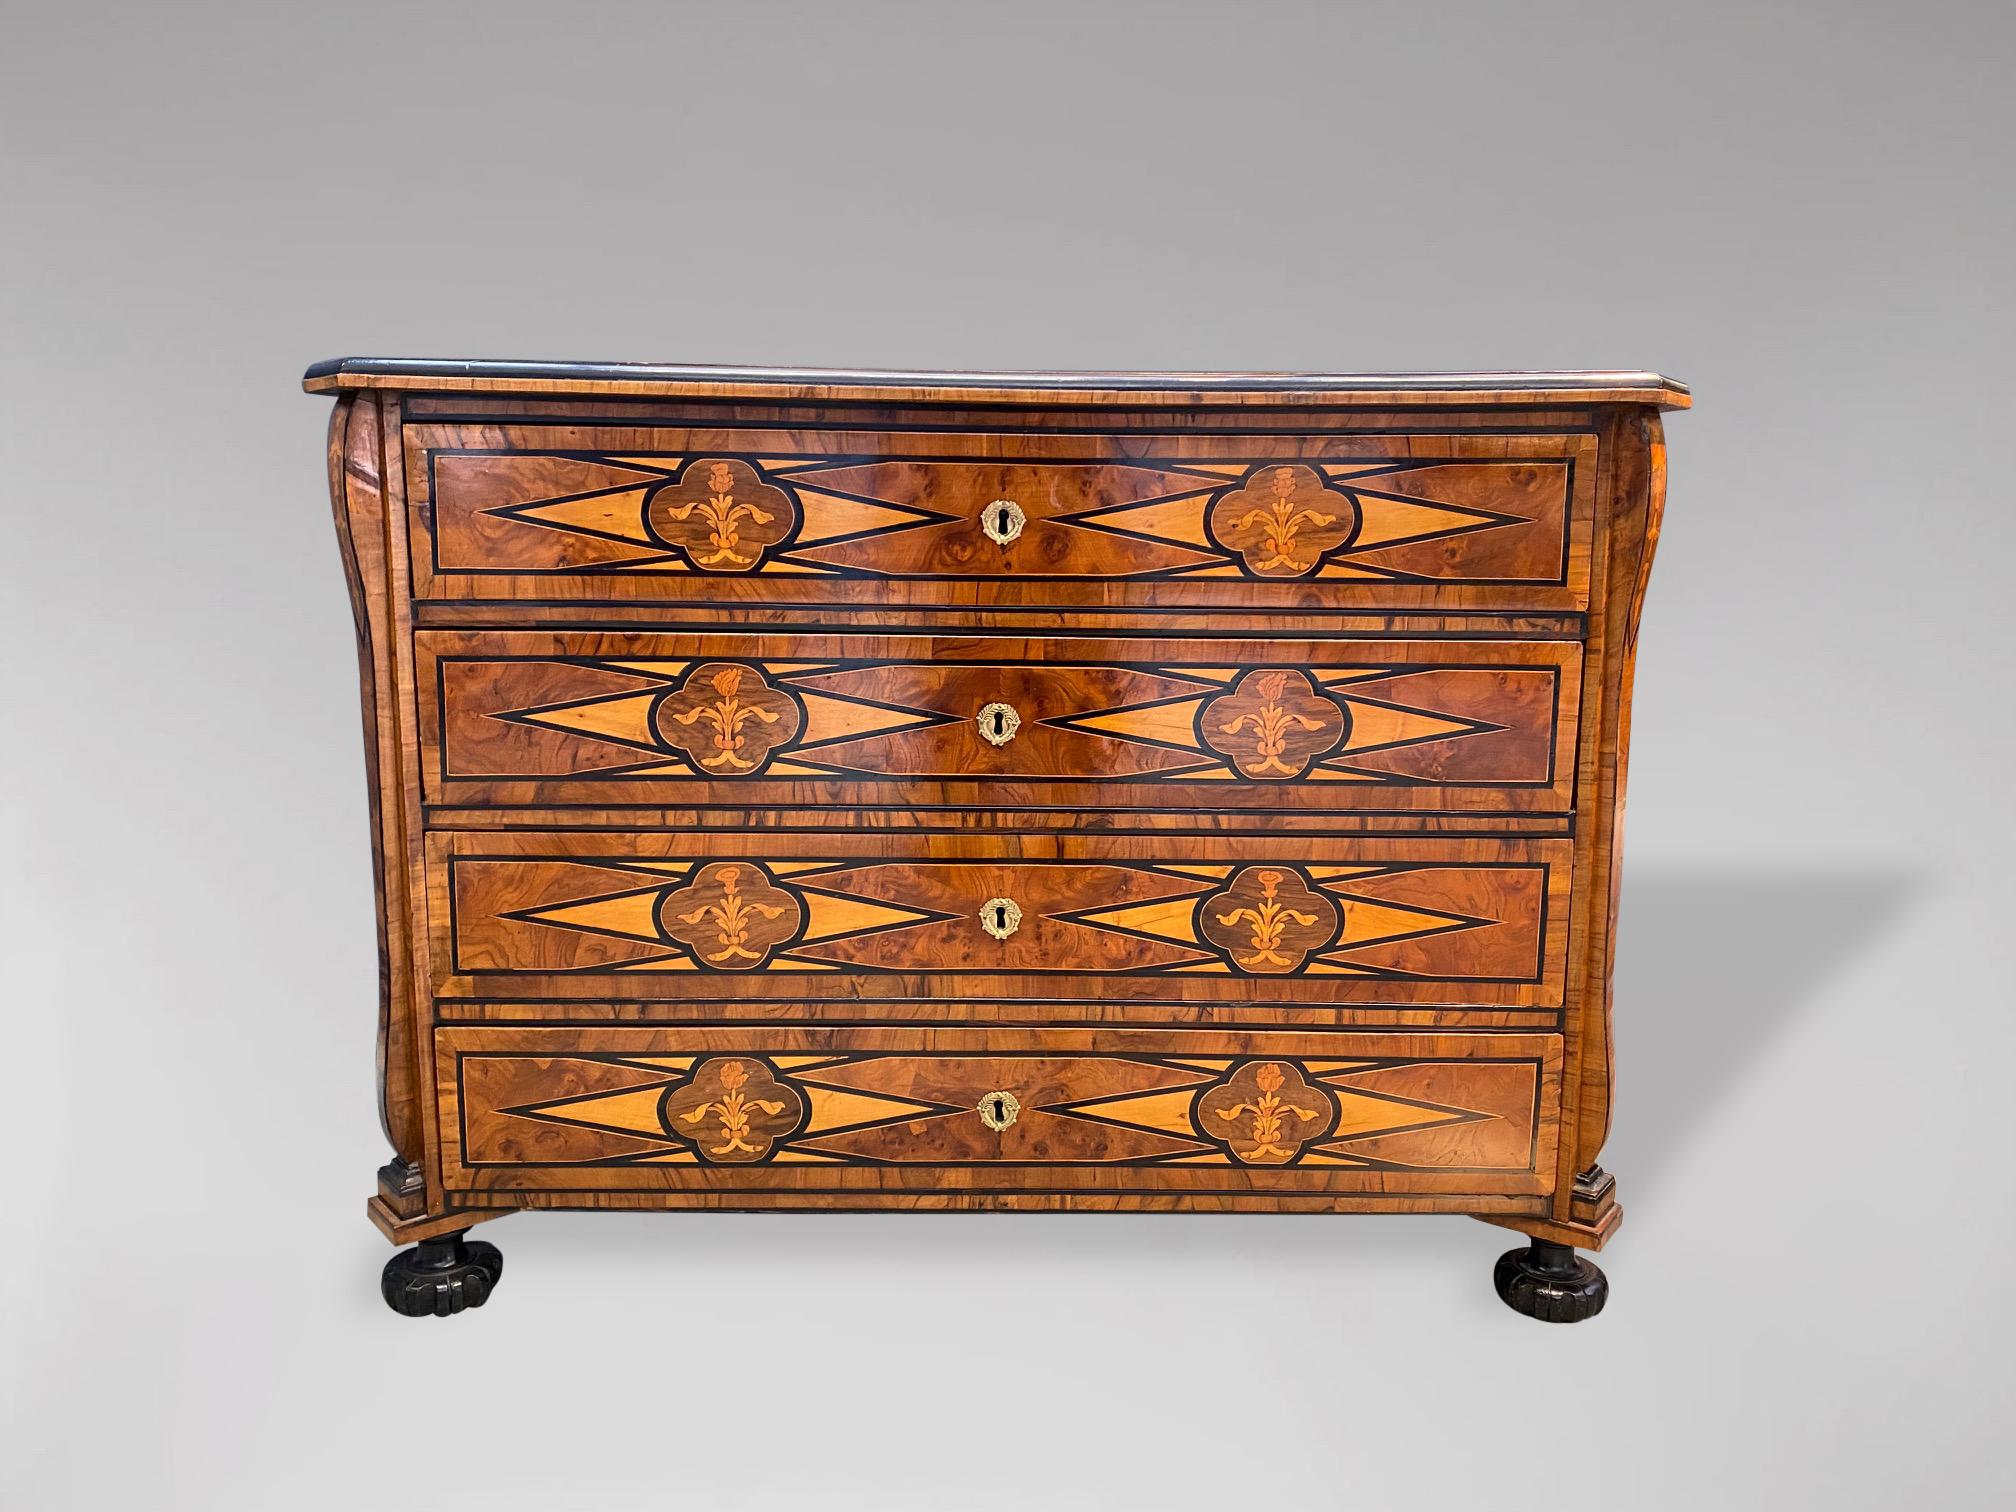 18th Century Italian Marquetry and Inlay Commode In Good Condition In Petworth,West Sussex, GB